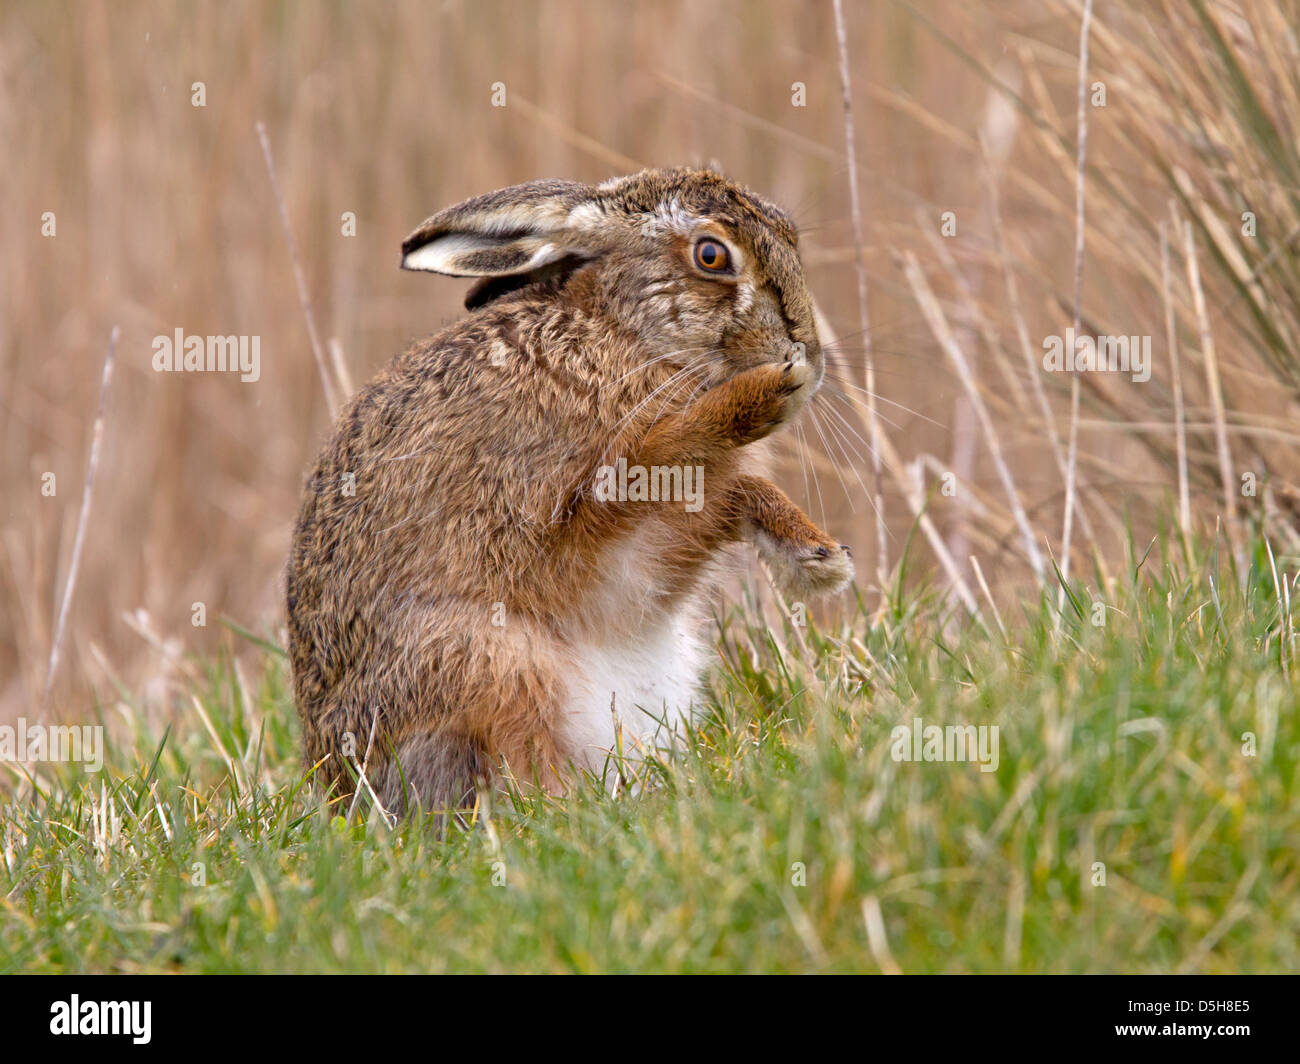 European brown hare grooming Banque D'Images